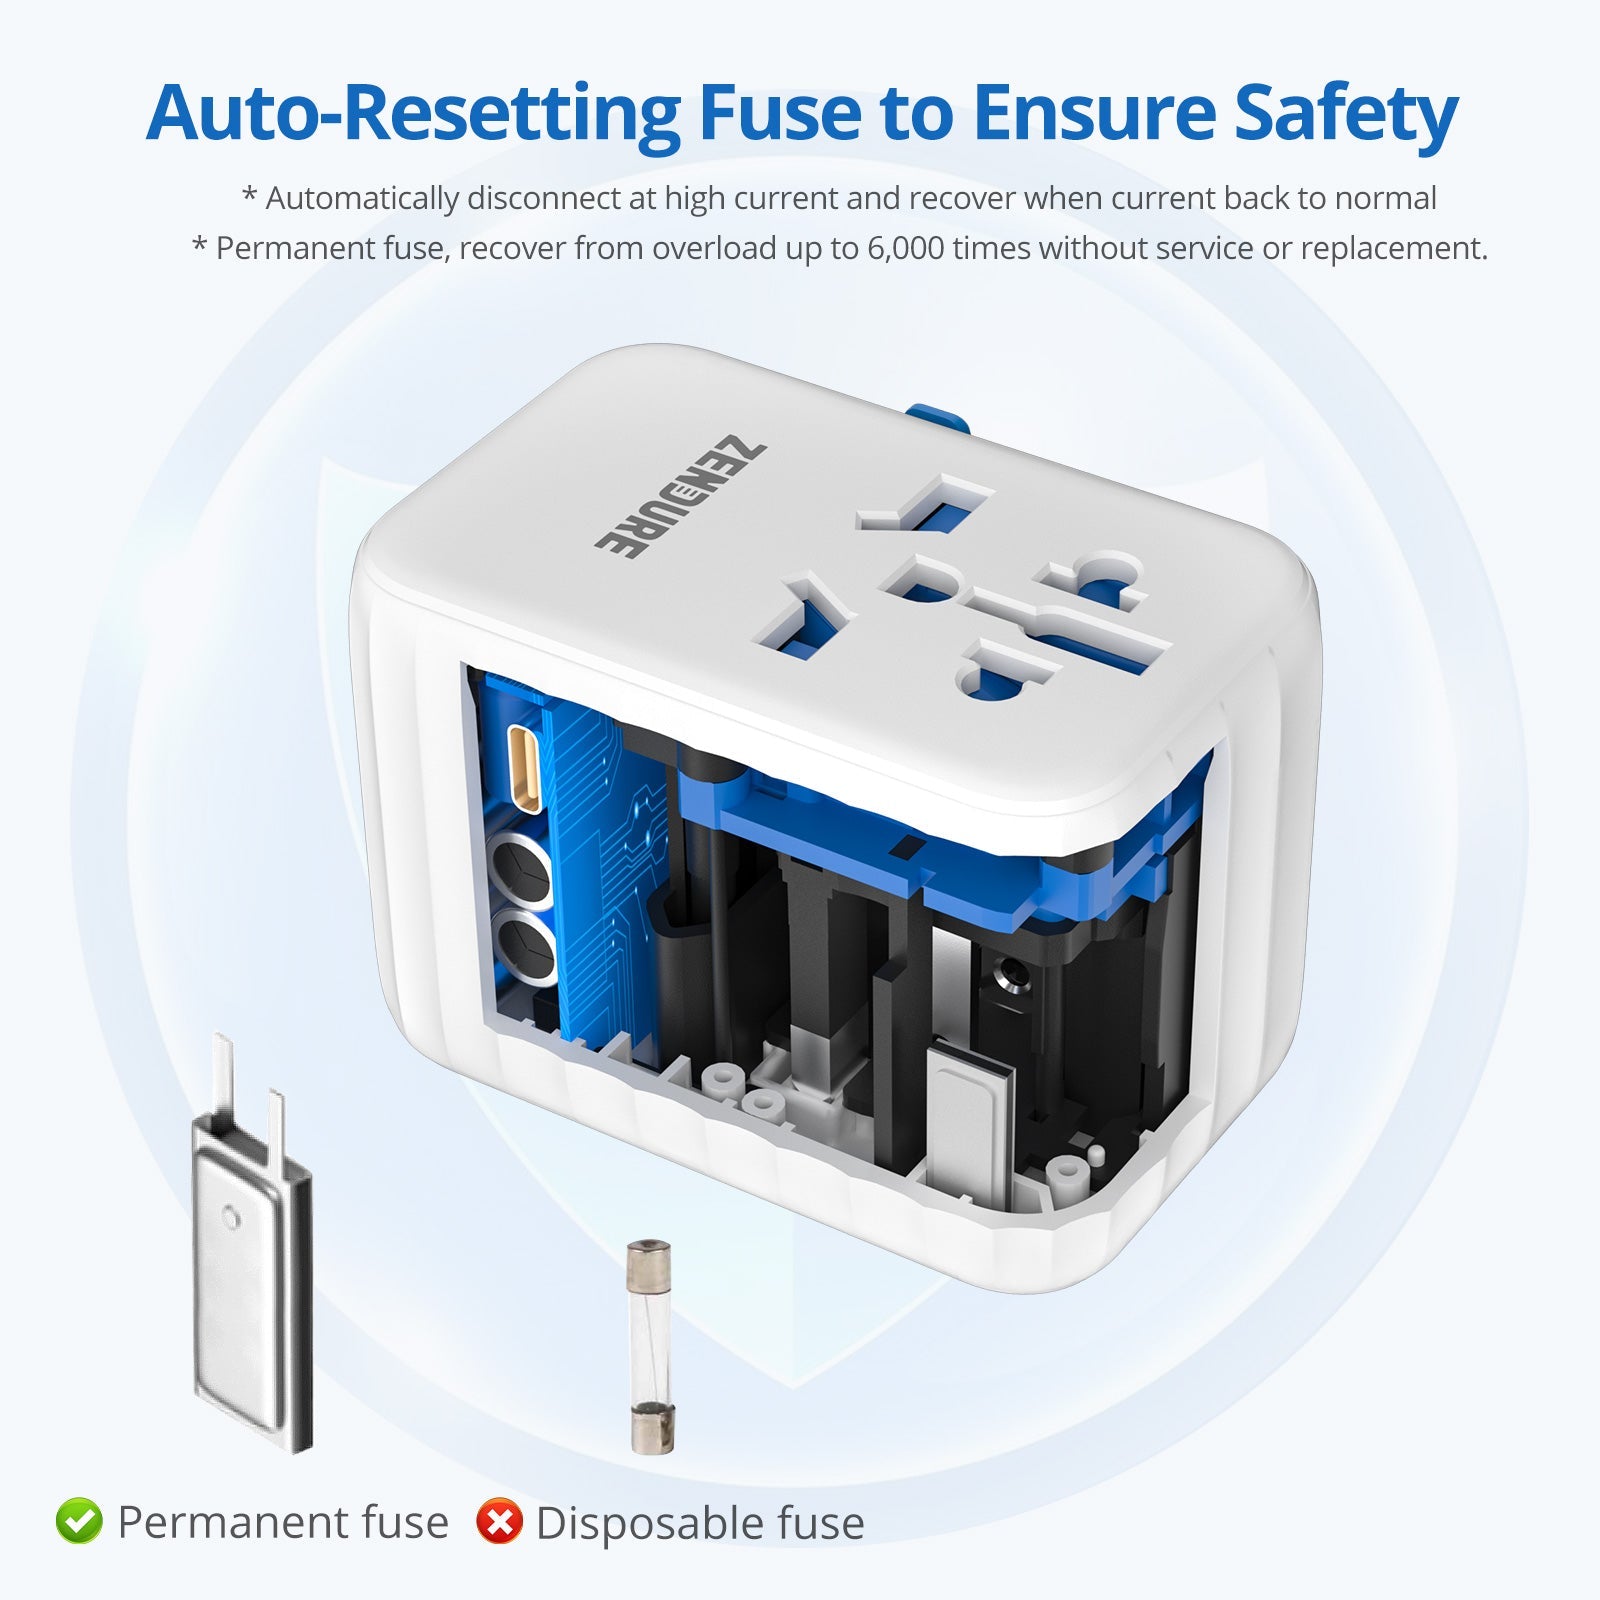 Passport II Pro - The Perfect Home and Travel Adapter